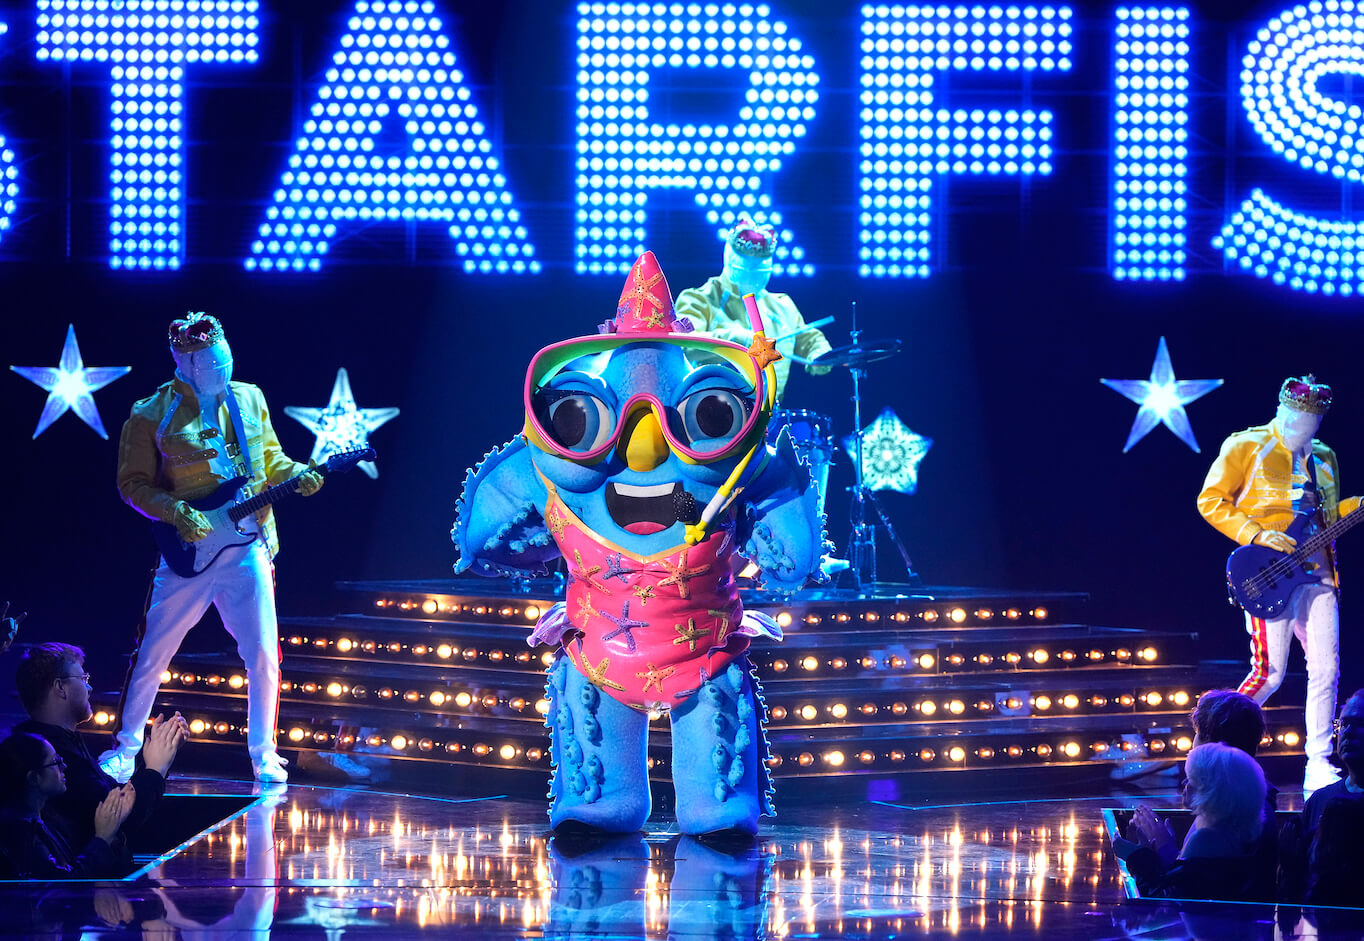 'The Masked Singer' Season 11 Group A mask Starfish on stage